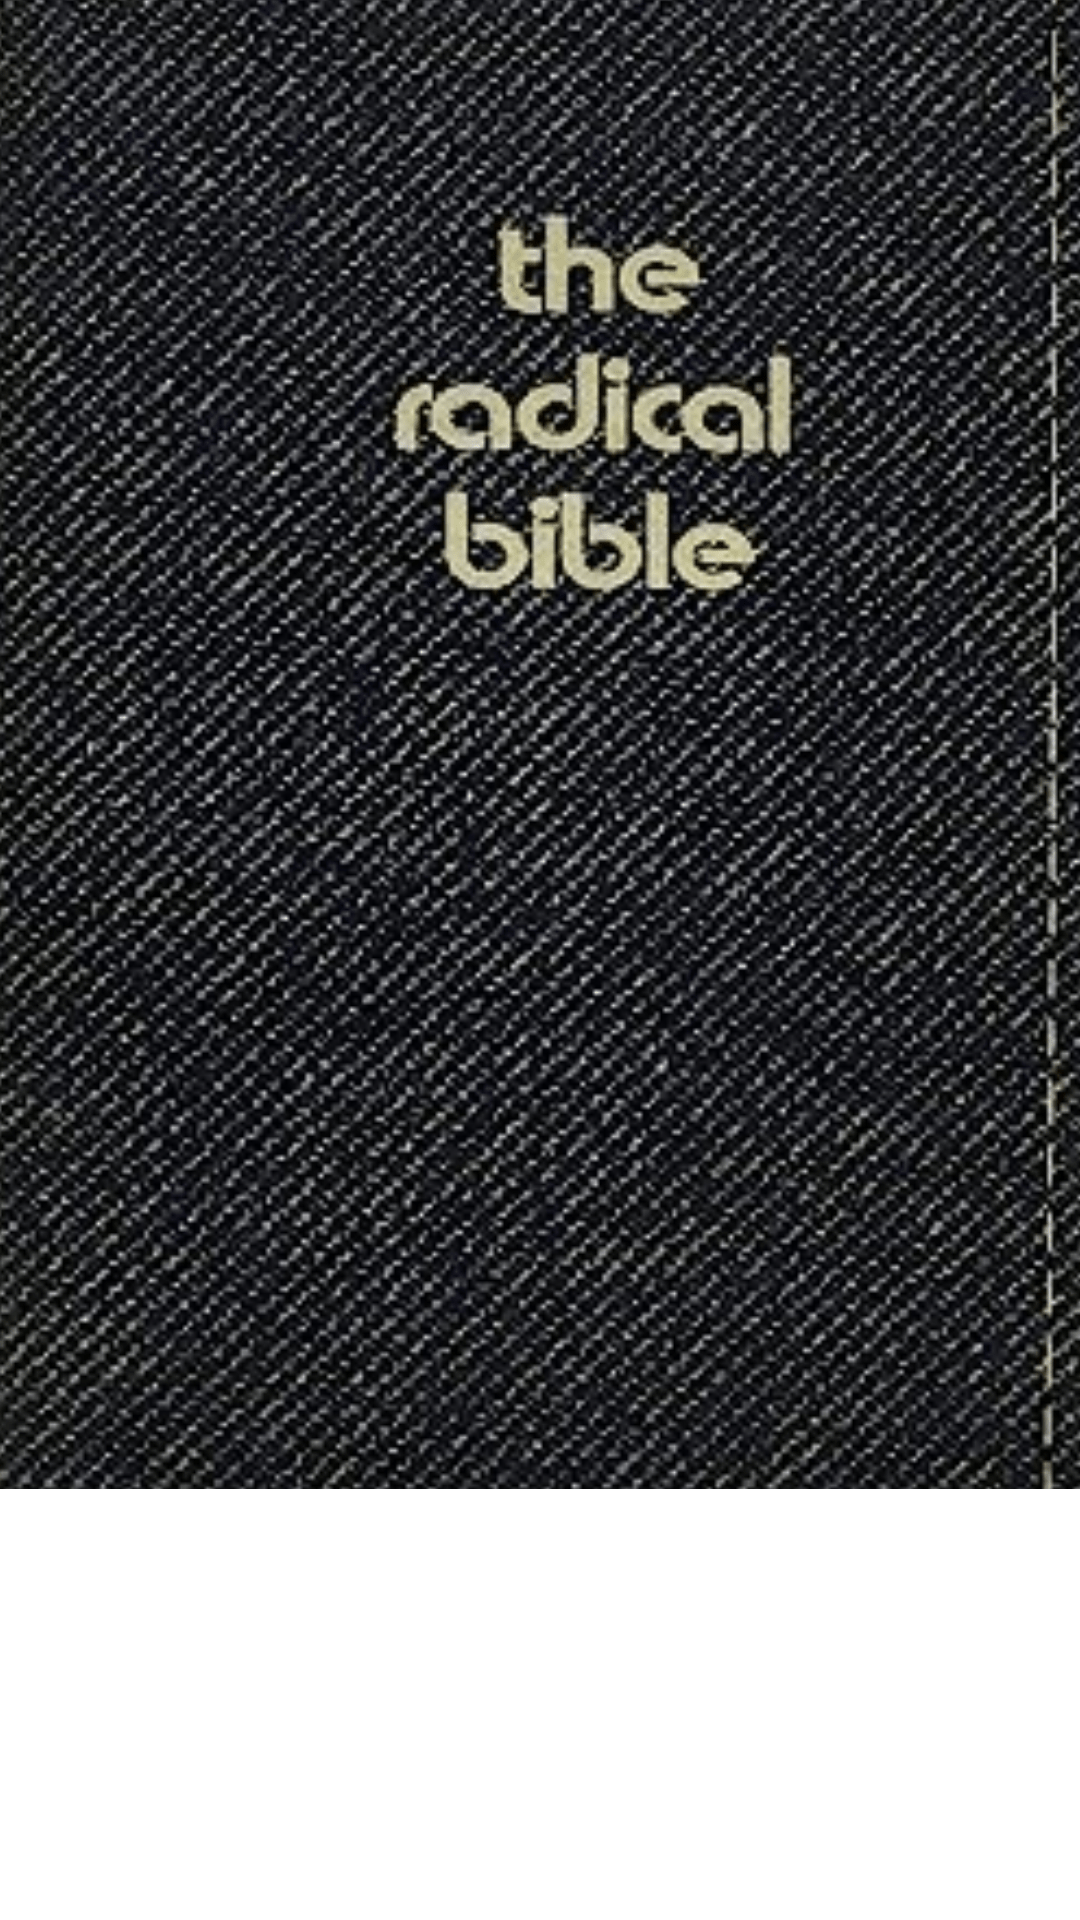 The Radical Bible by John Eagleson